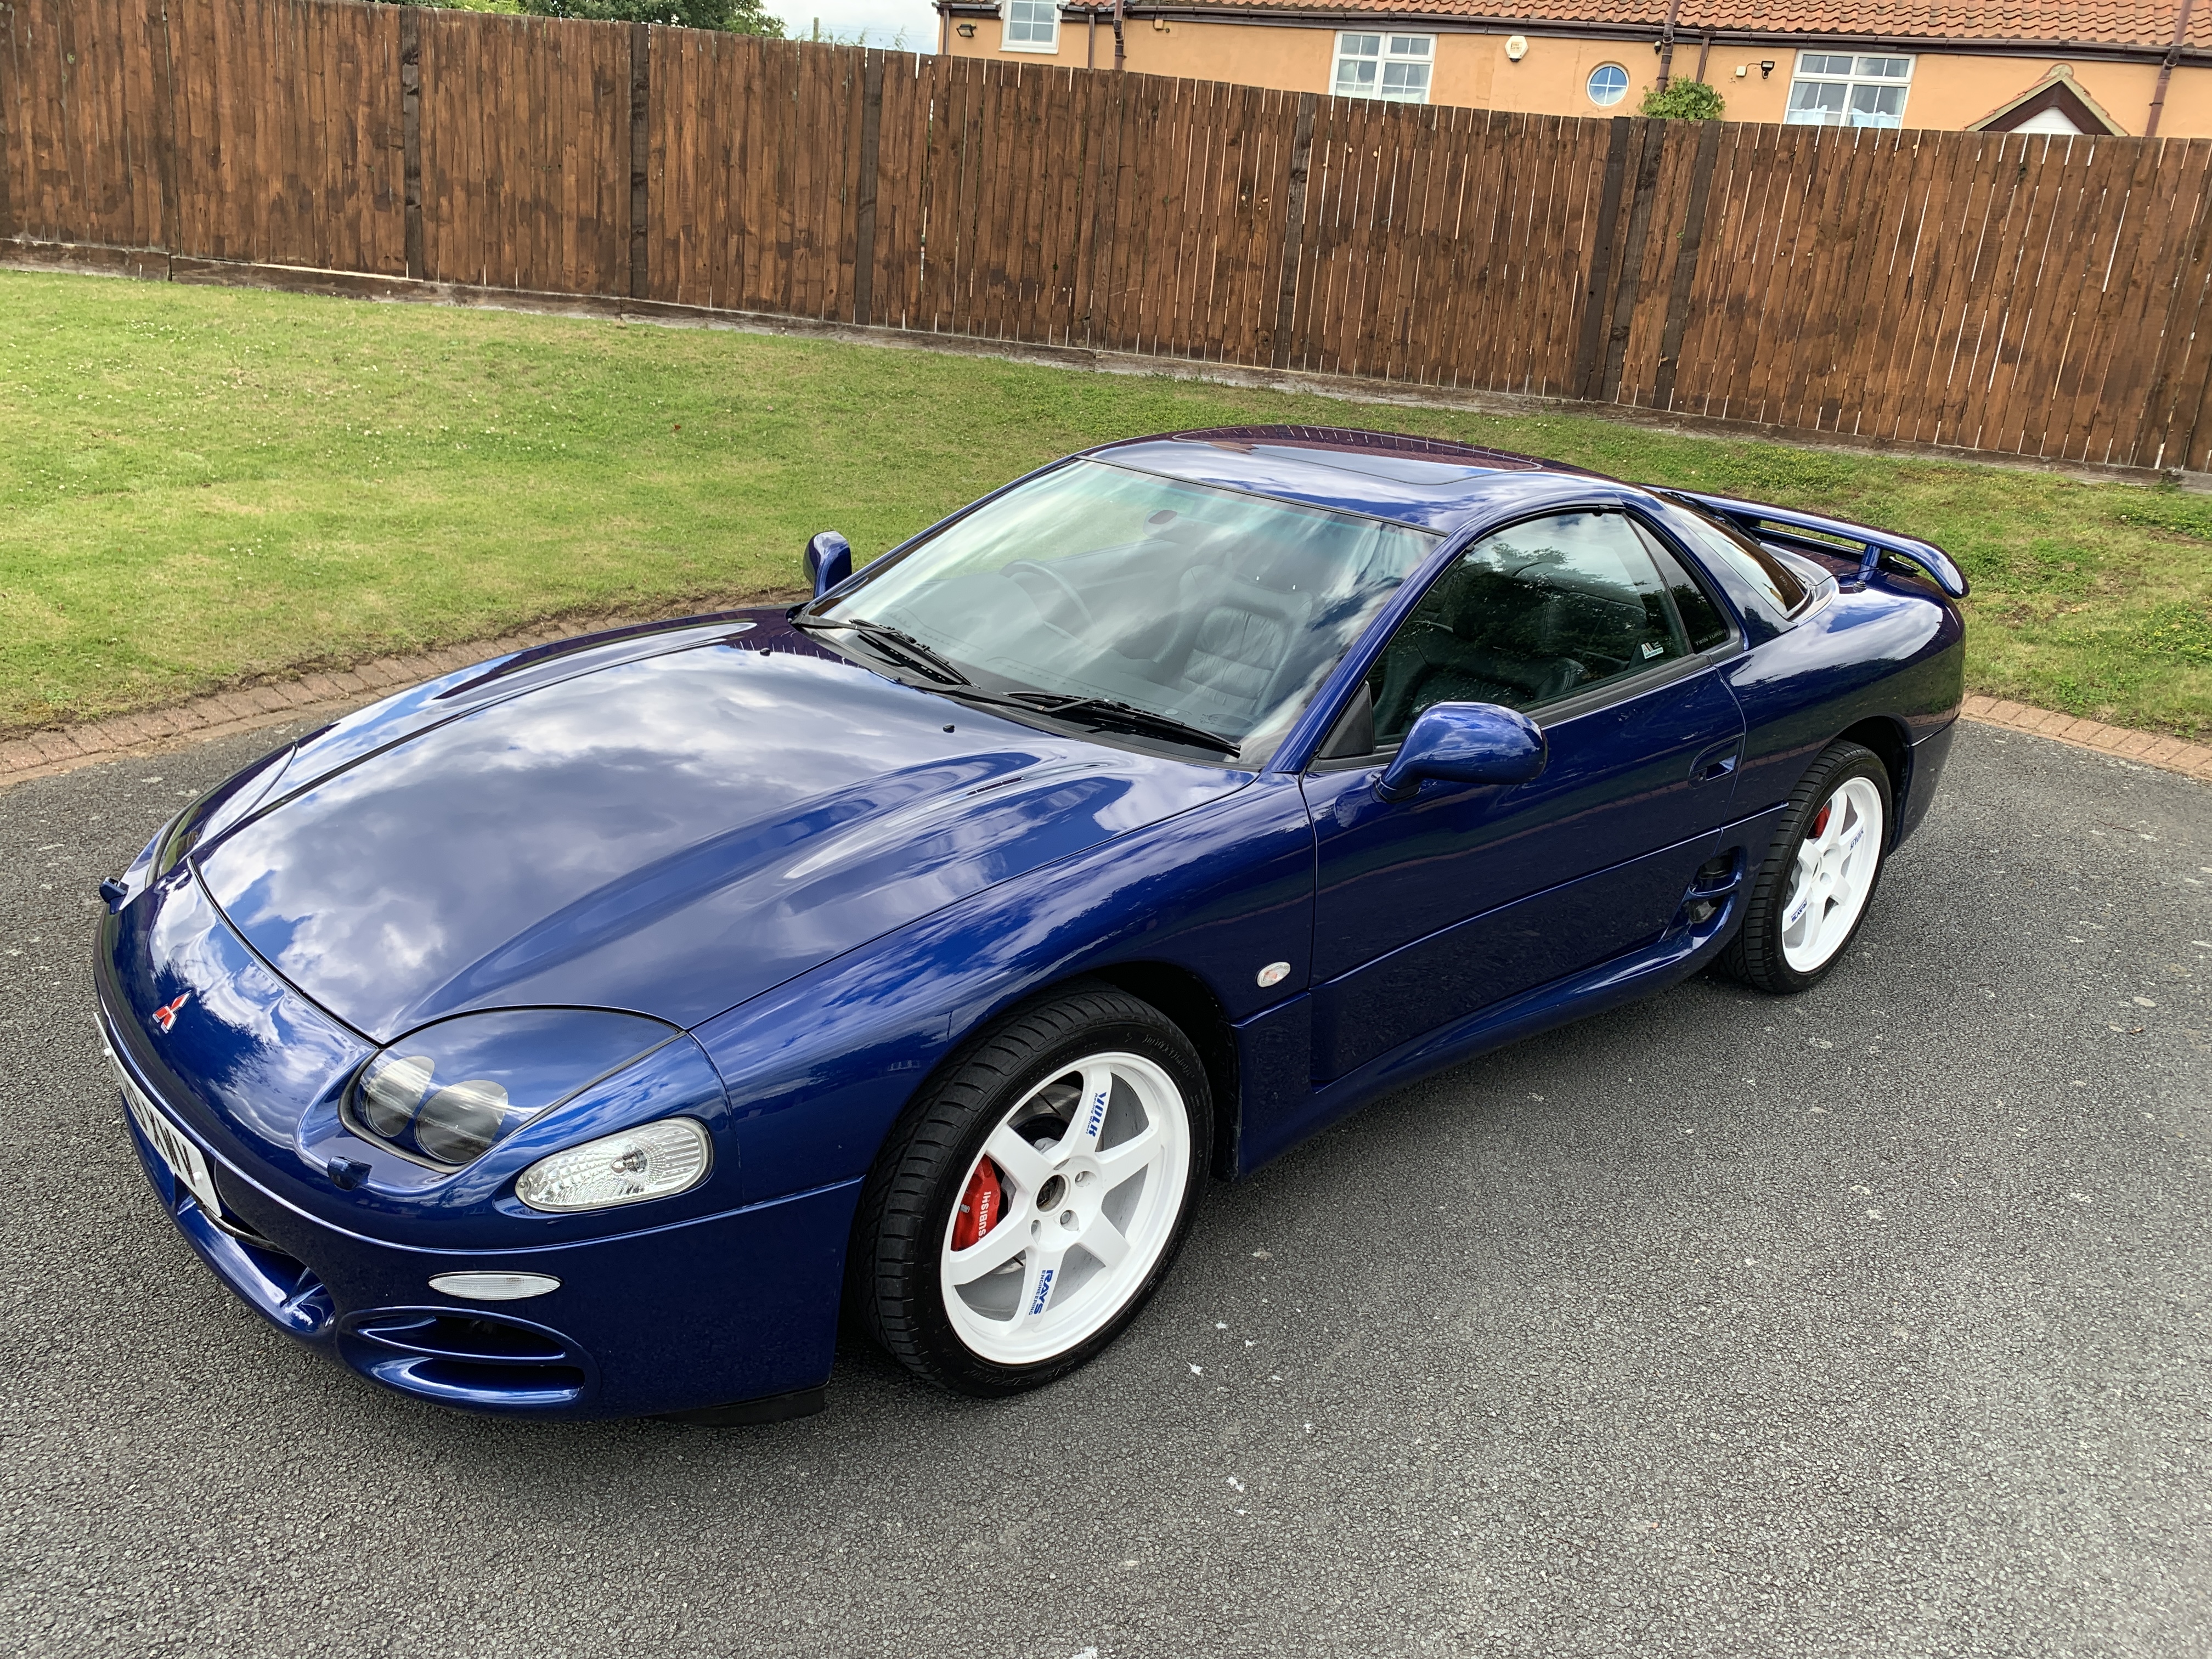 My 1997 Mitsubishi 3000GT is now For Sale :( - GTO's / 3000GT's - GTO UK